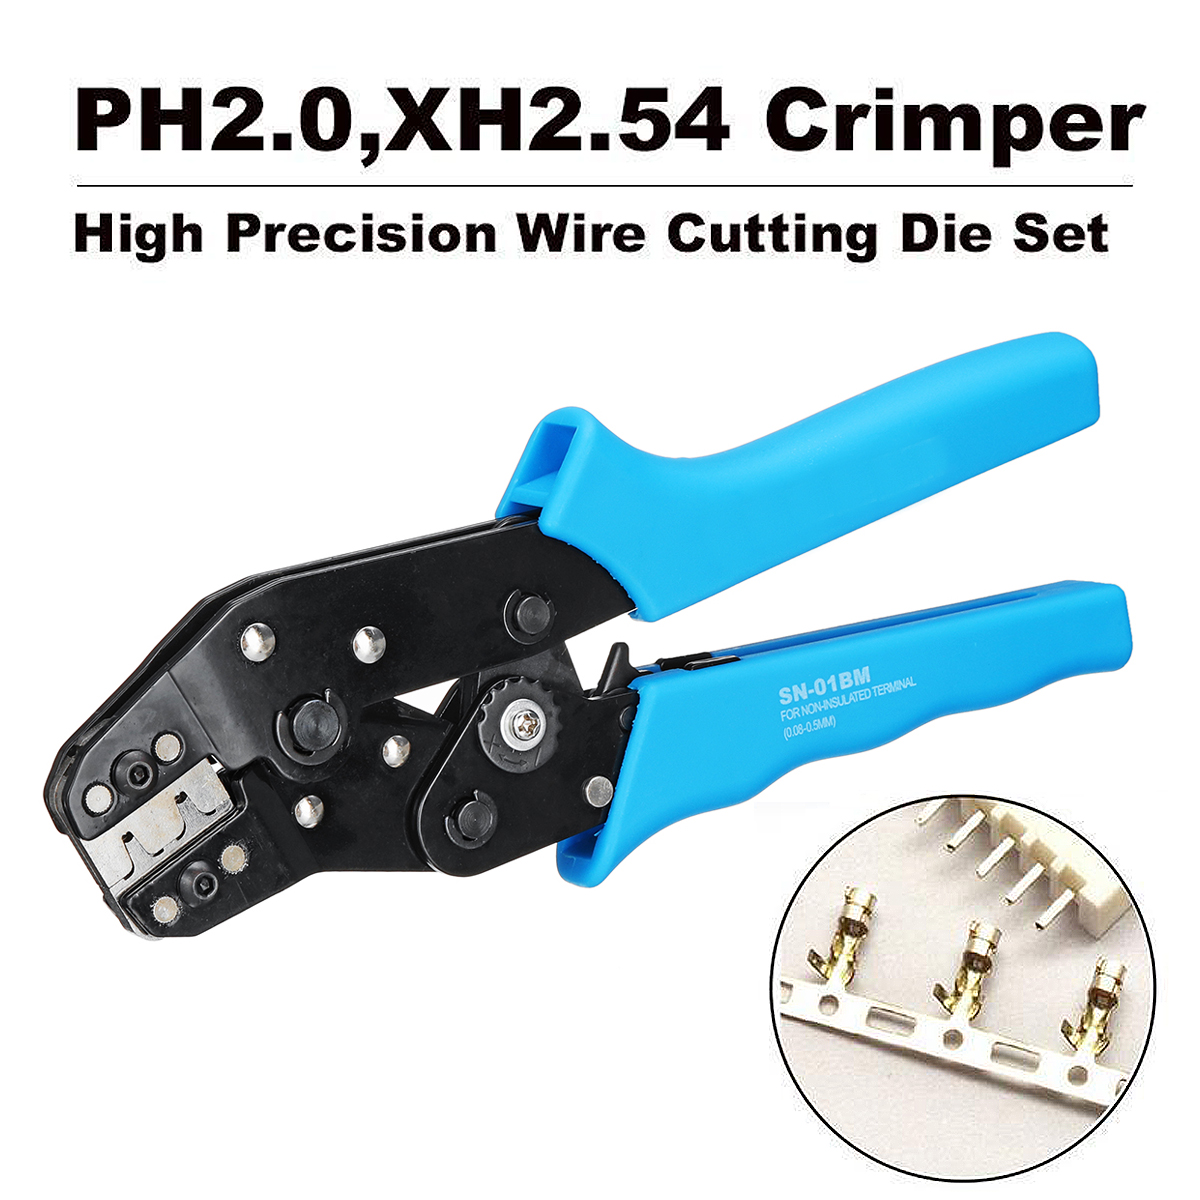 SN-01BM AWG28-20 Self-adjusting Terminal Wire Cable Crimping Pliers Tool for Dupont PH2.0 XH2.54 KF2510 JST Molex D-SUB Terminal 35